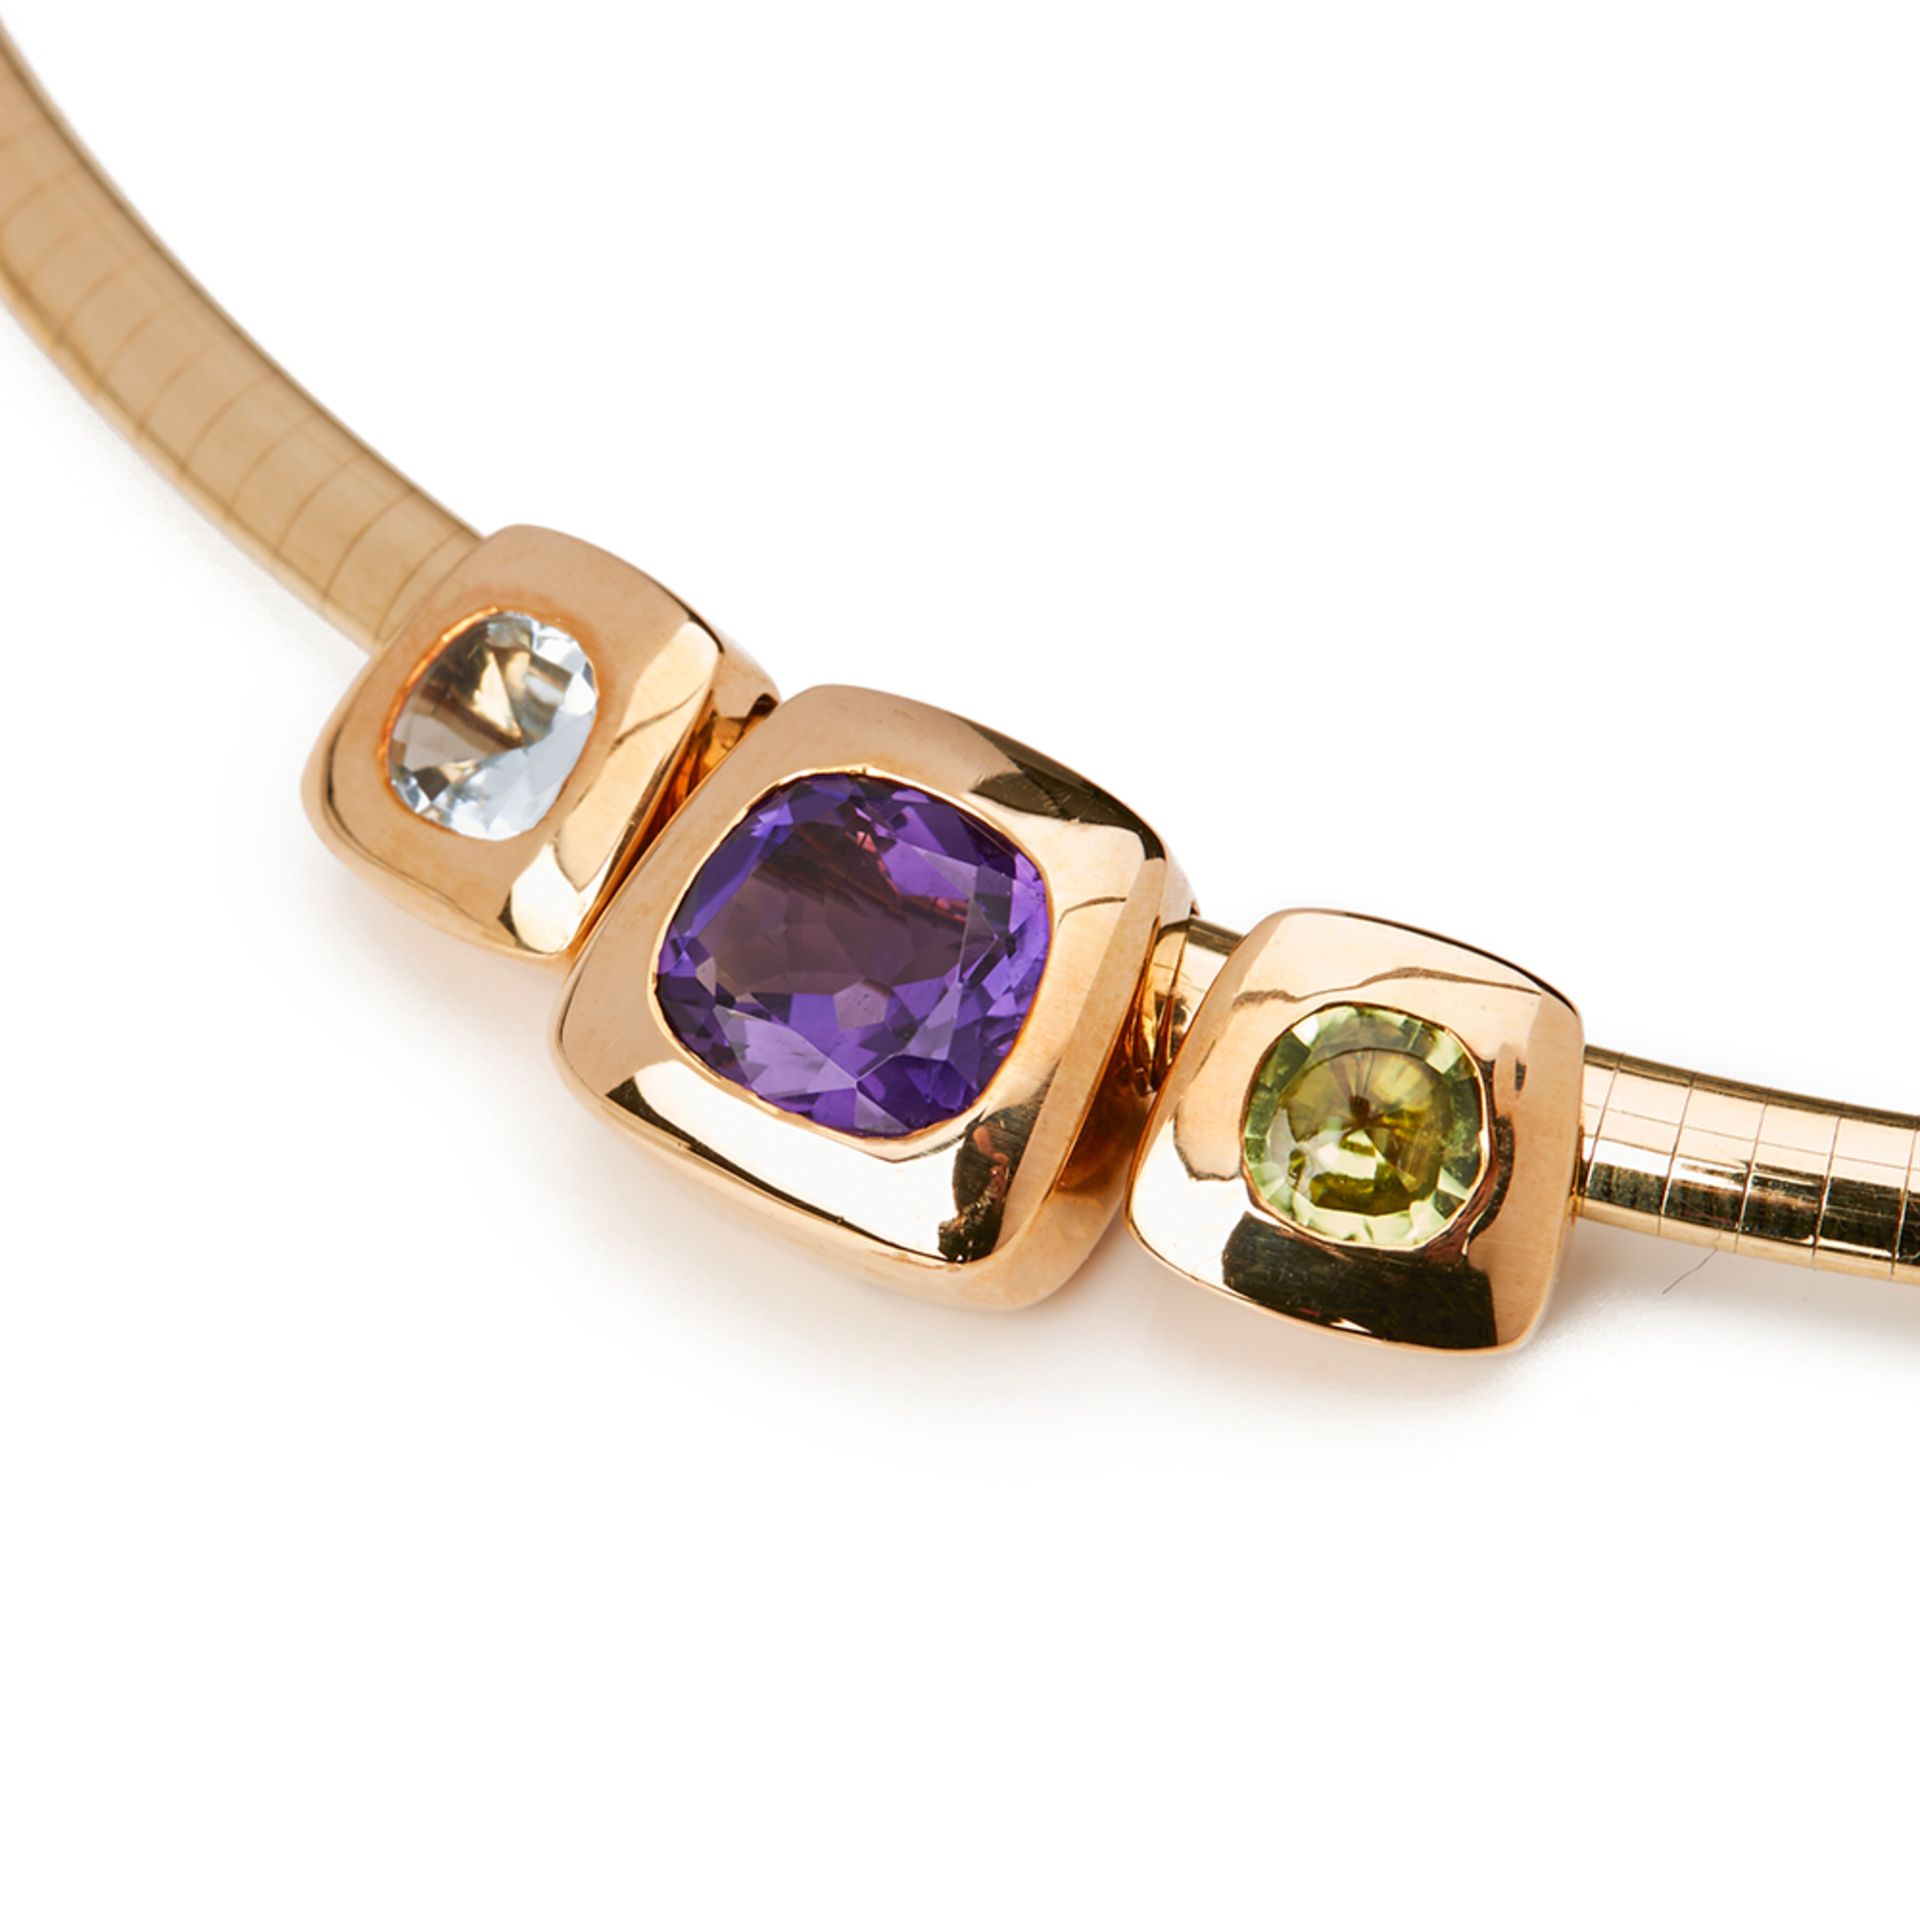 Chanel 18k Yellow Gold Amethyst Peridot Baroque Necklace - Image 2 of 7